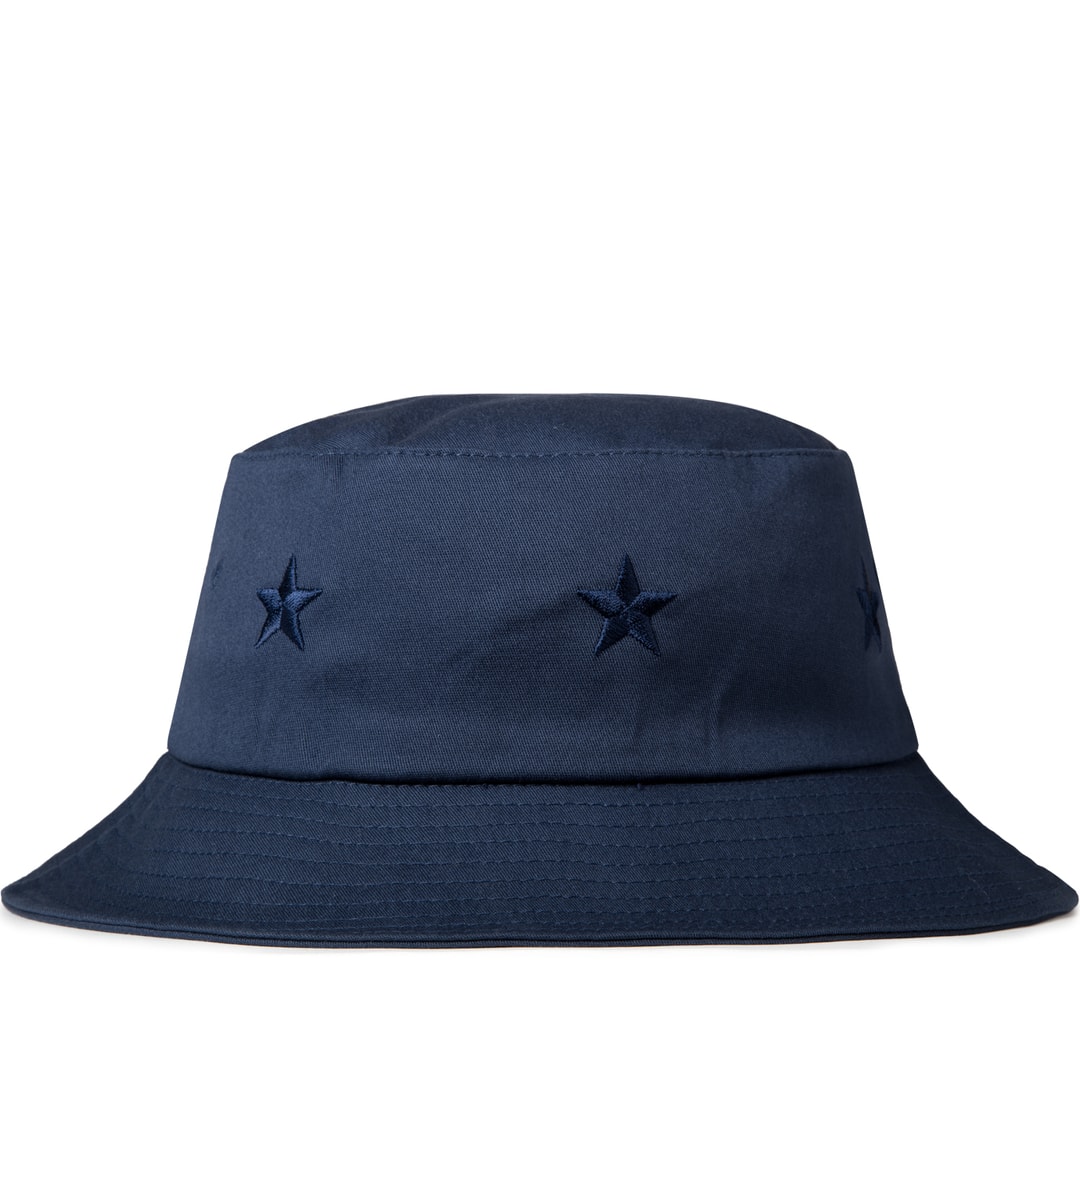 Clsc - Navy Stars Bucket Hat | HBX - Globally Curated Fashion and ...